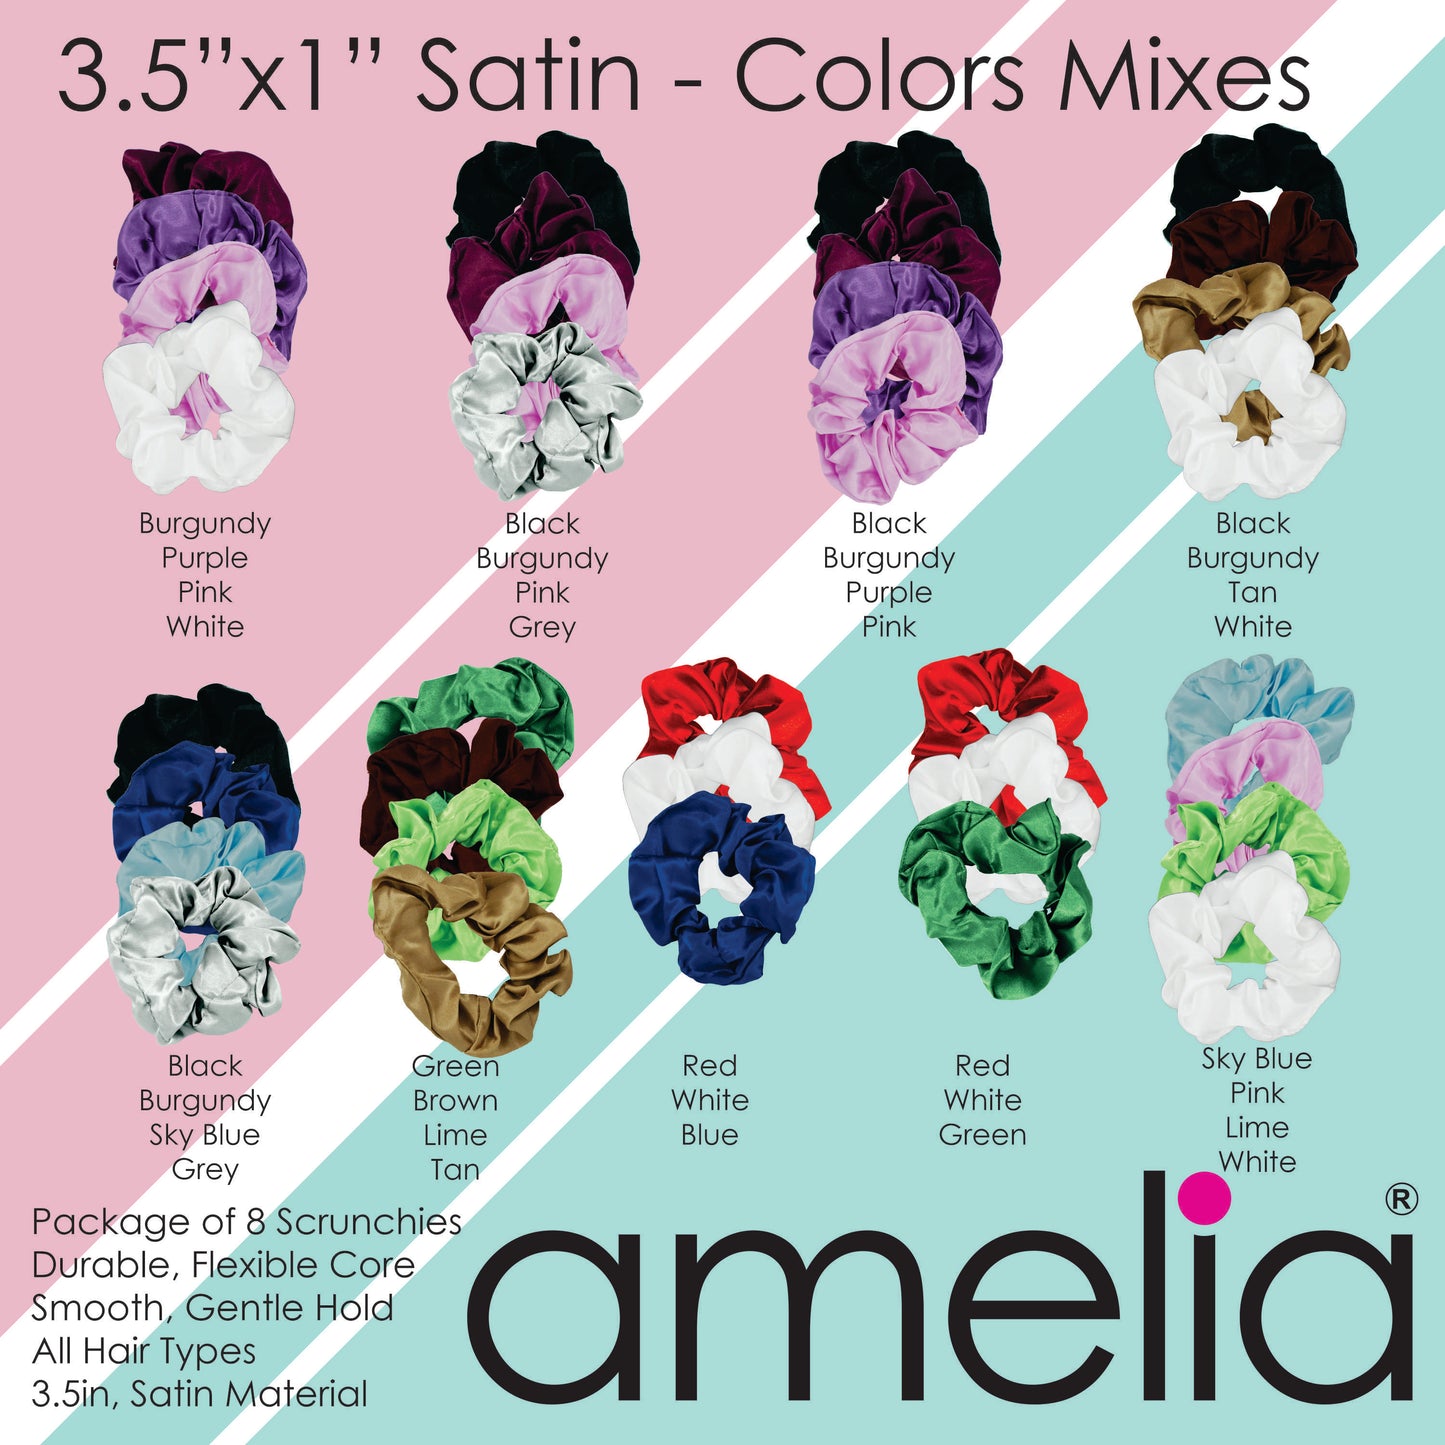 Amelia Beauty Products, Prime Red Satin Scrunchies, 3.5in Diameter, Gentle on Hair, Strong Hold, No Snag, No Dents or Creases. 8 Pack